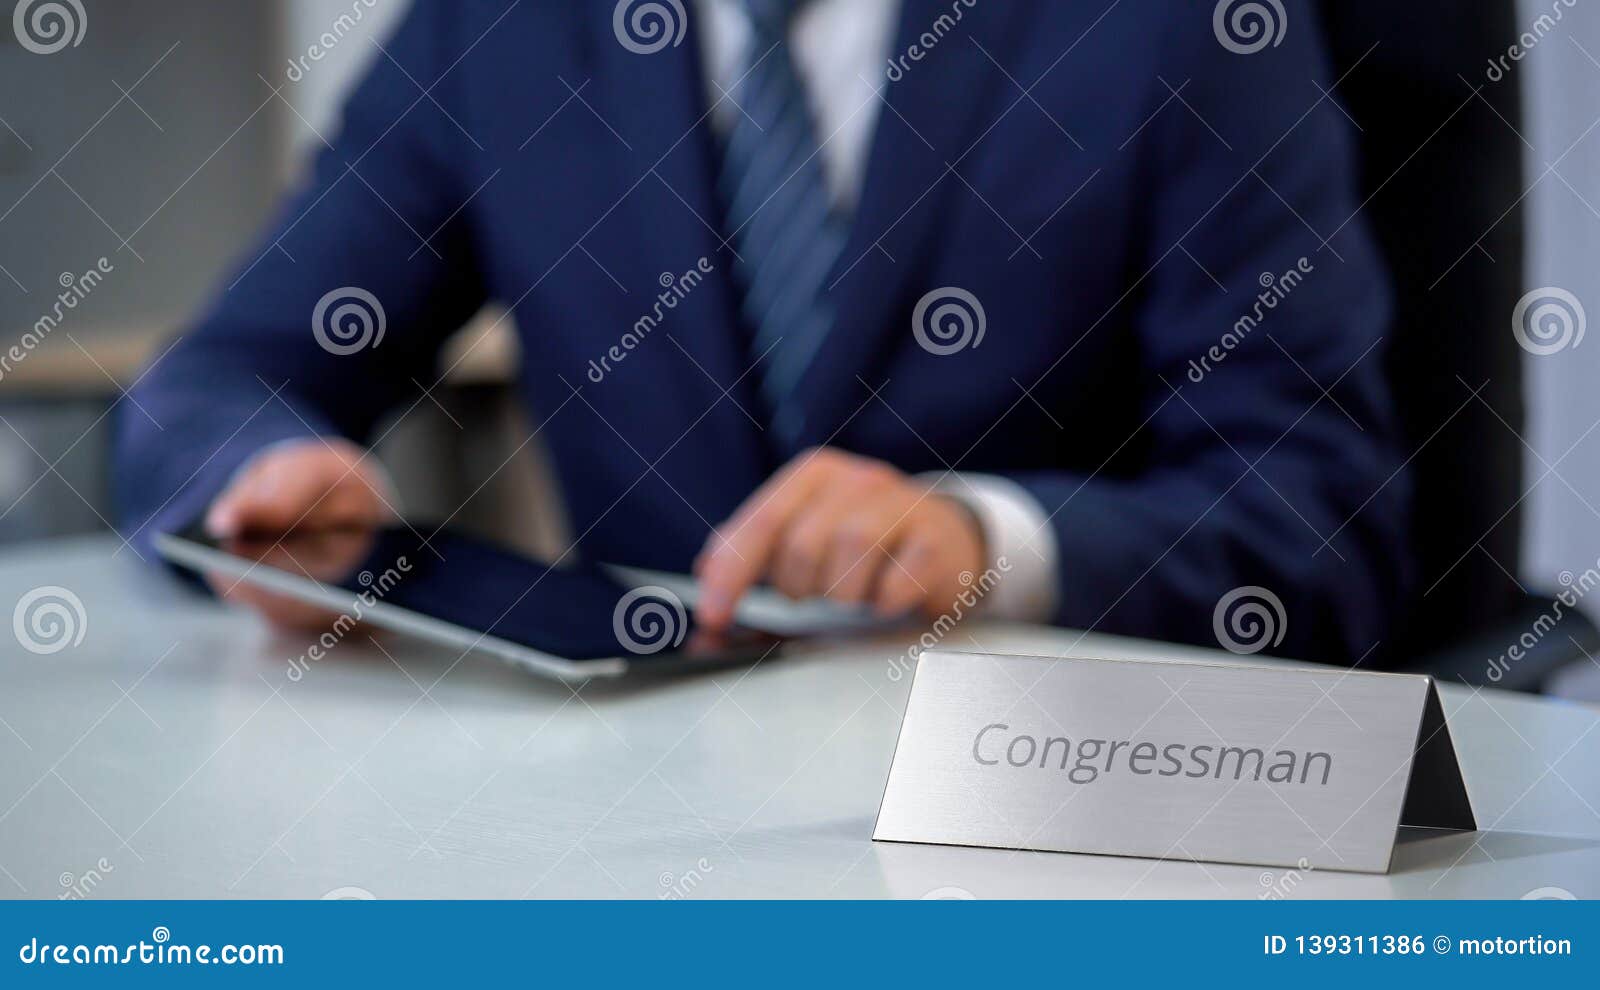 young congressman using tablet pc, reading political news online, election